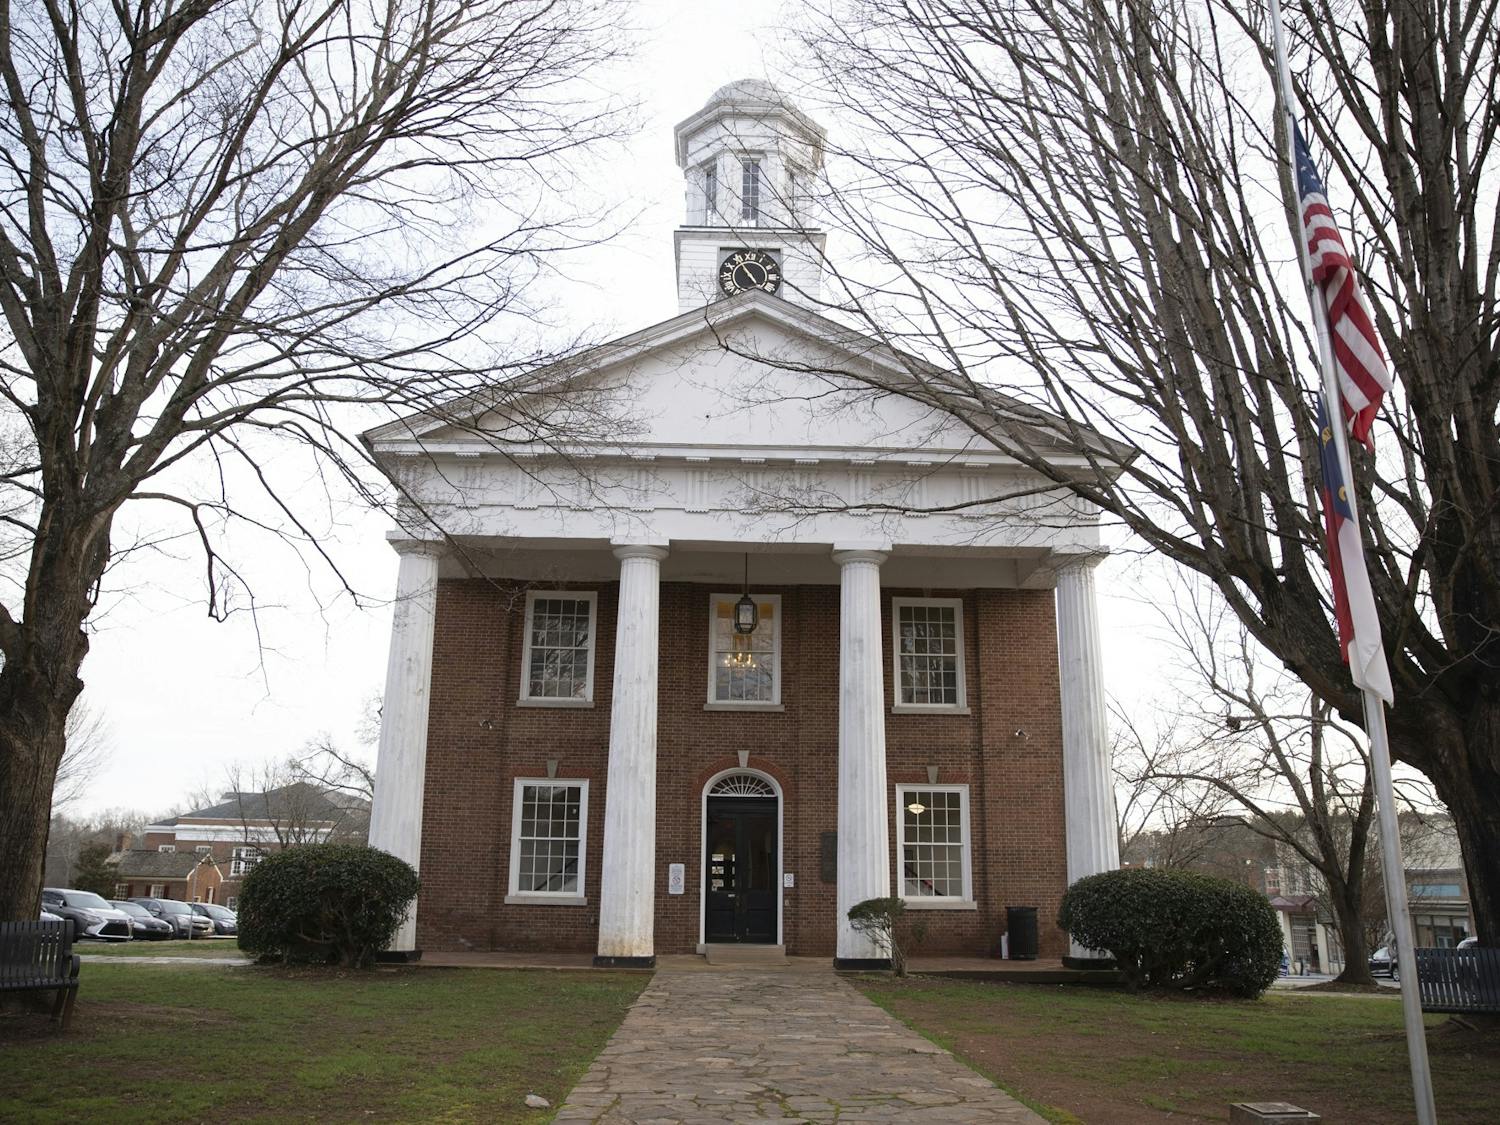 The Orange County Historic Courthouse pictured on Jan. 29, 2020. North Carolina Chief Justice Thomas Ruffin's portrait inside the courthouse was removed after research revealed he owned and traded slaves in addition to authoring State v. Mann, which gave enslavers nearly limitless control over their slaves.